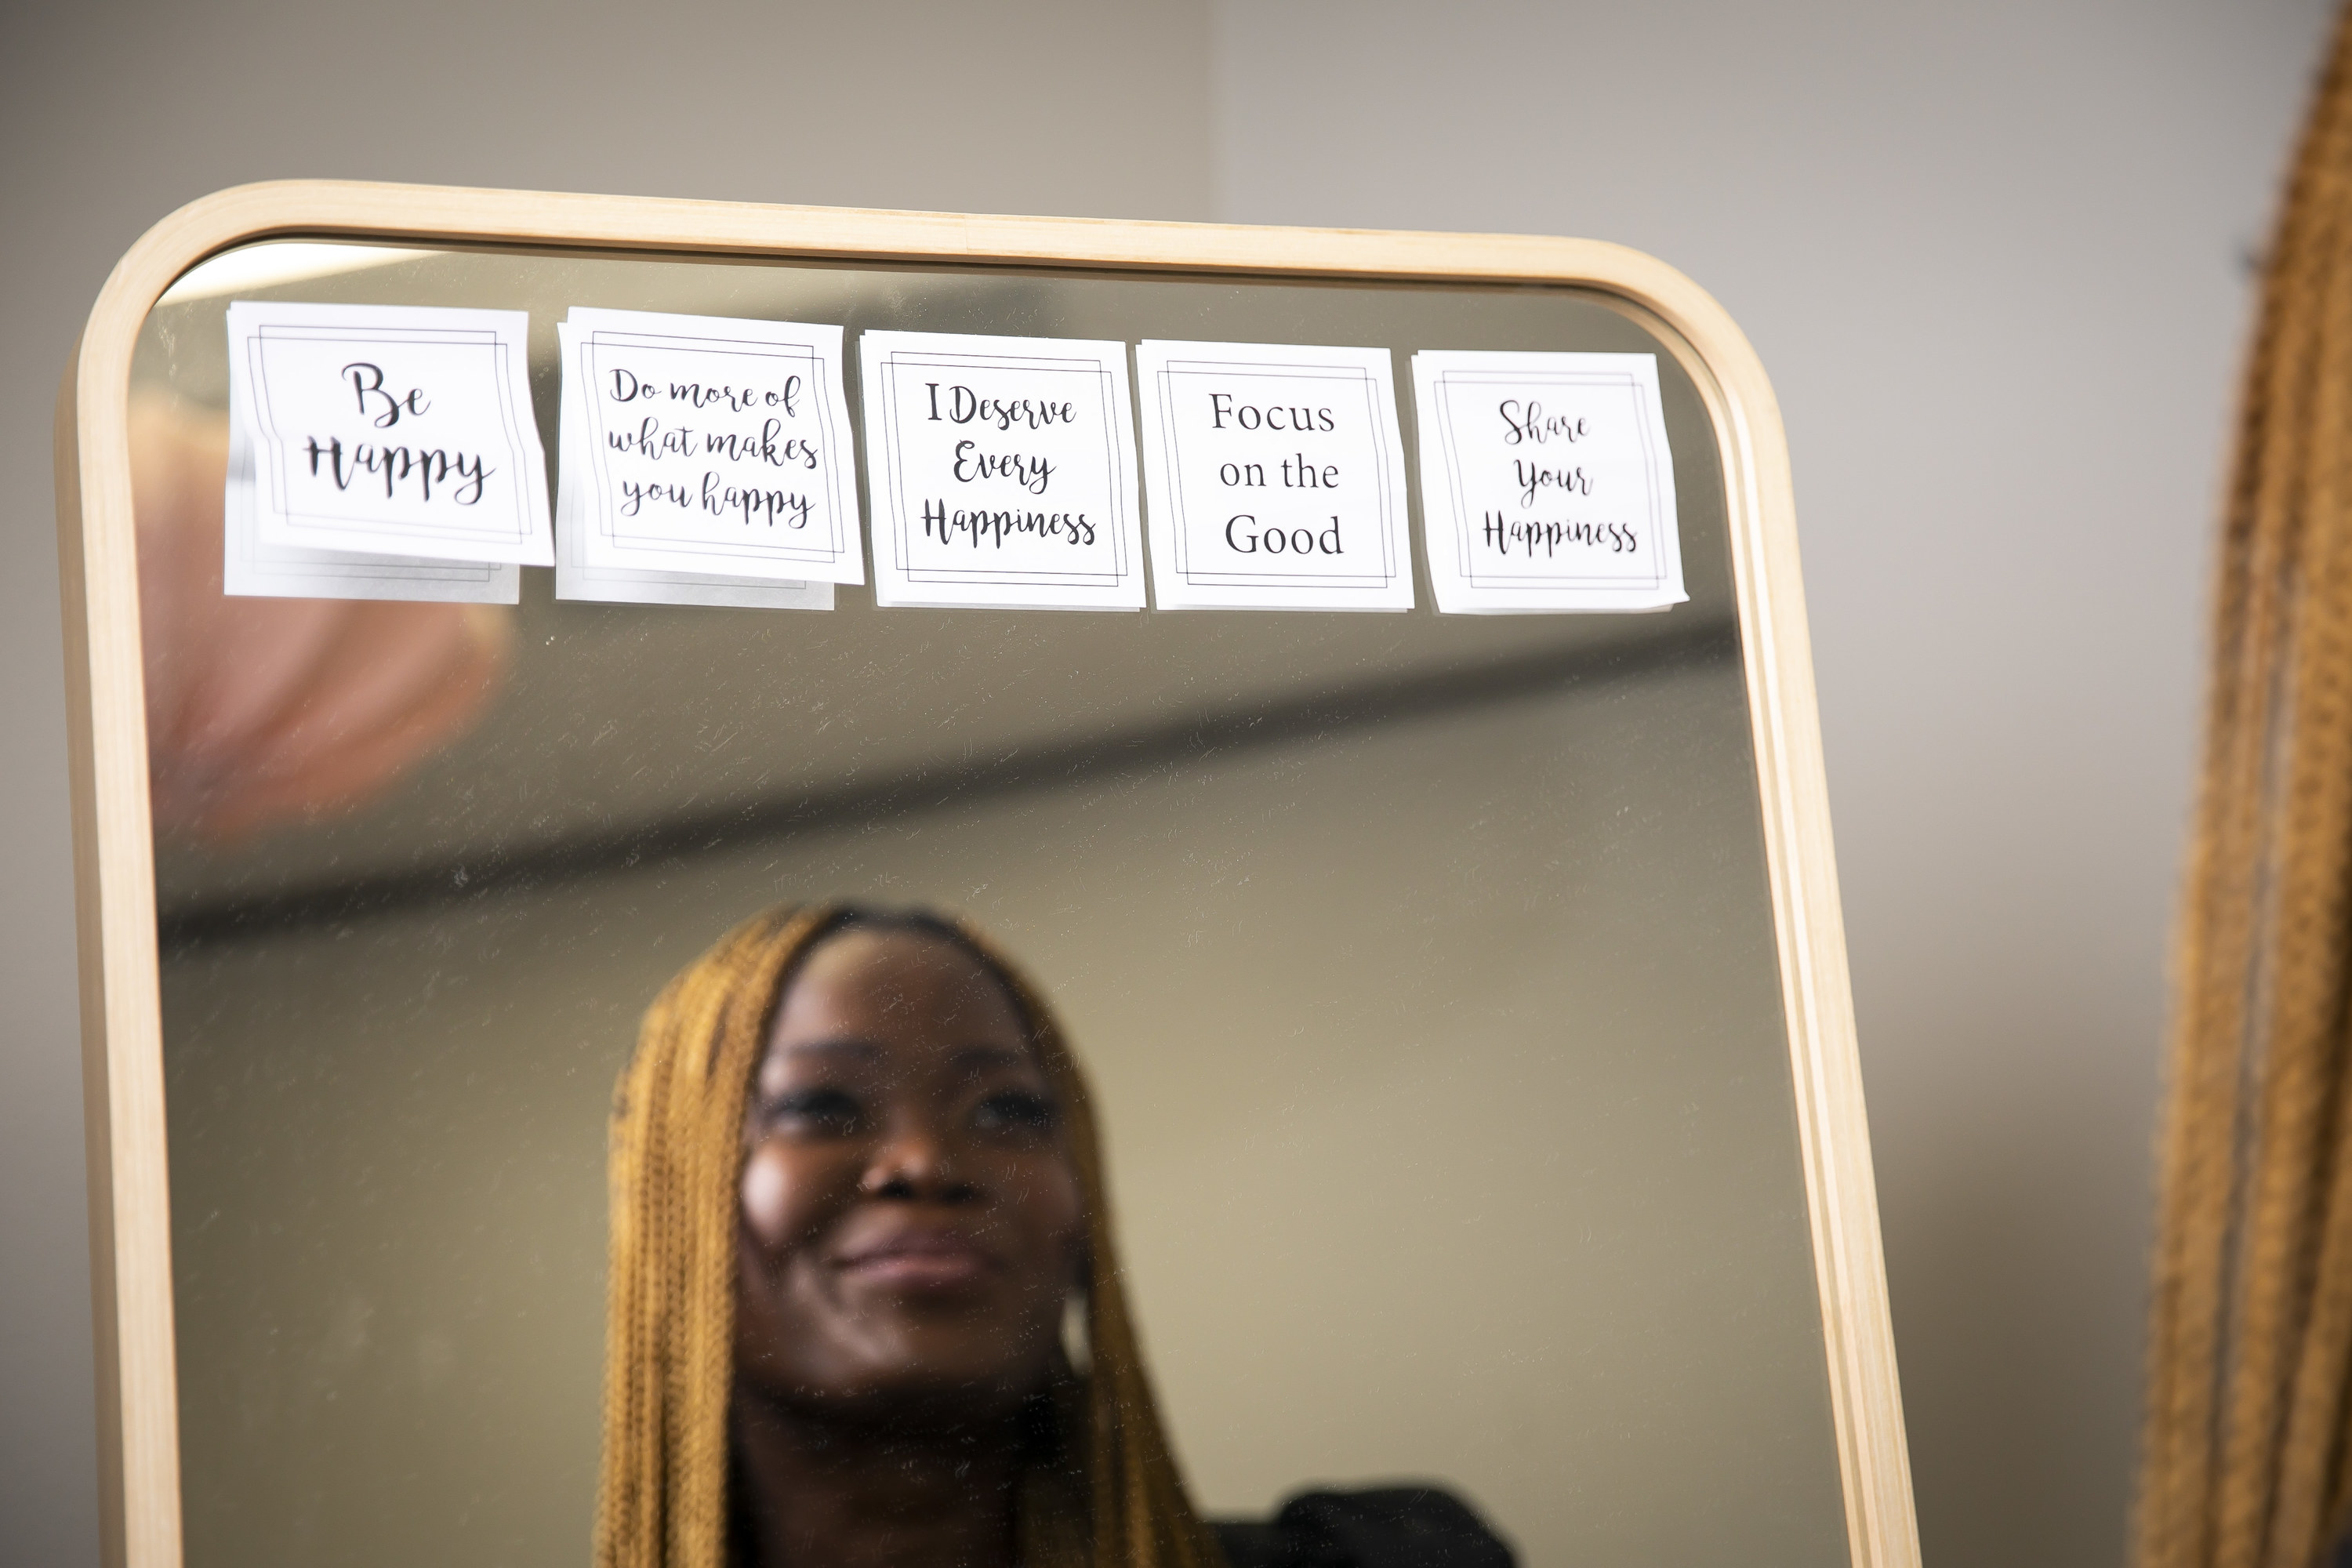 A woman looking in a mirror with inspirational messages like &quot;be happy,&quot; &quot;share happiness,&quot; &quot;focus on the good&quot;